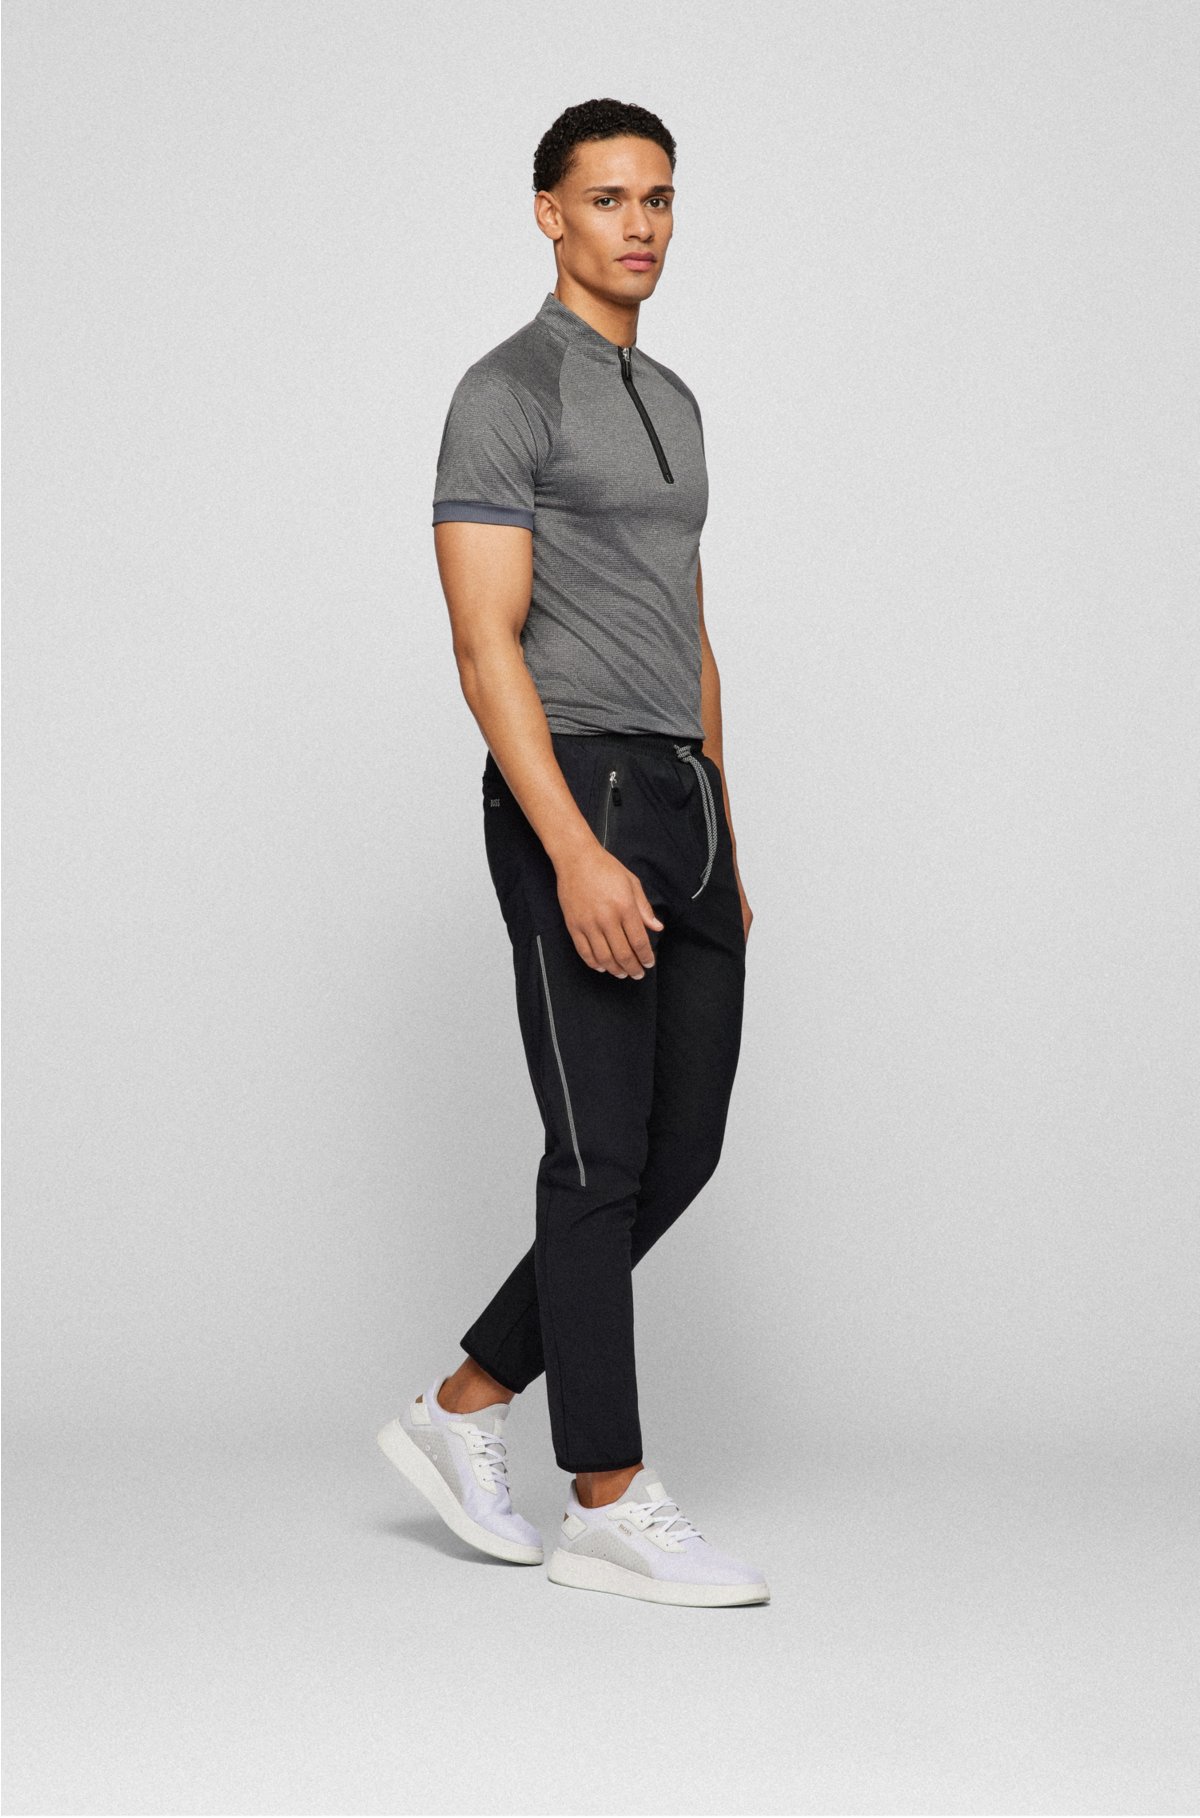 BOSS - Slim-fit polo shirt in active-stretch mesh